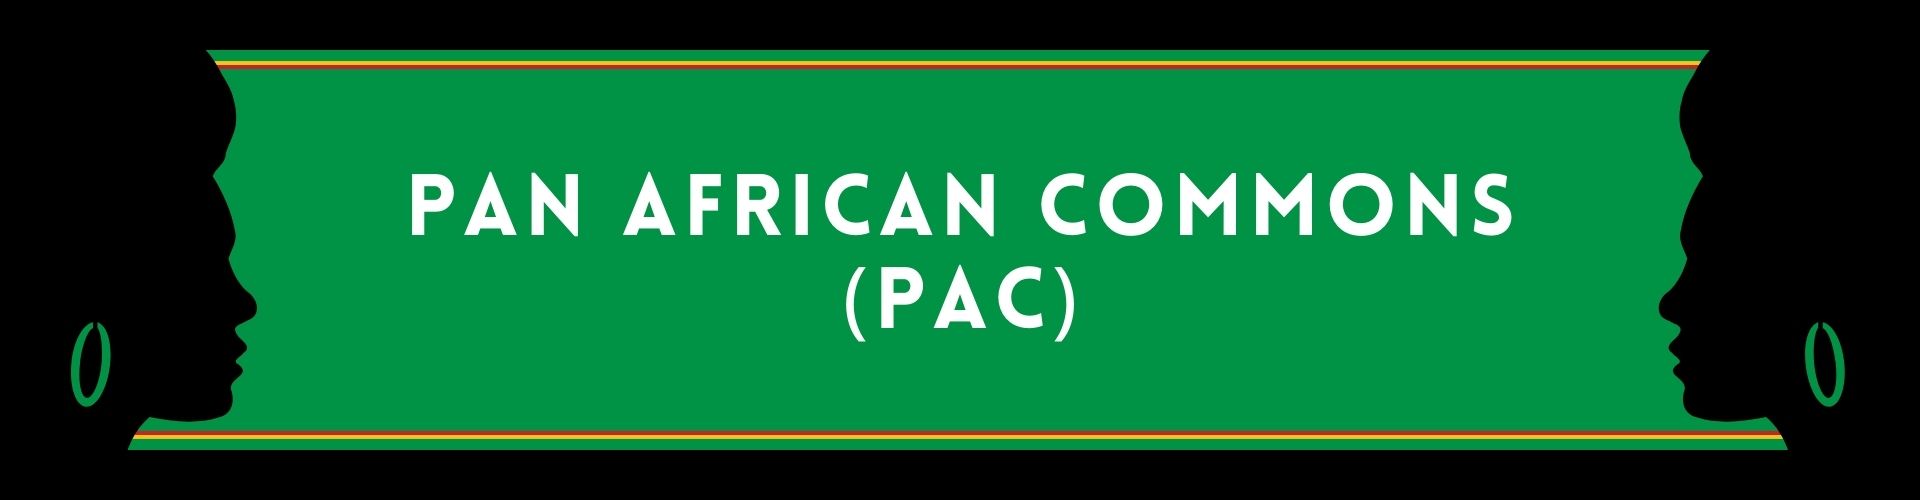 "Pan-African Commons" in white text against a black & green background with a silhouette of a woman on the left and right